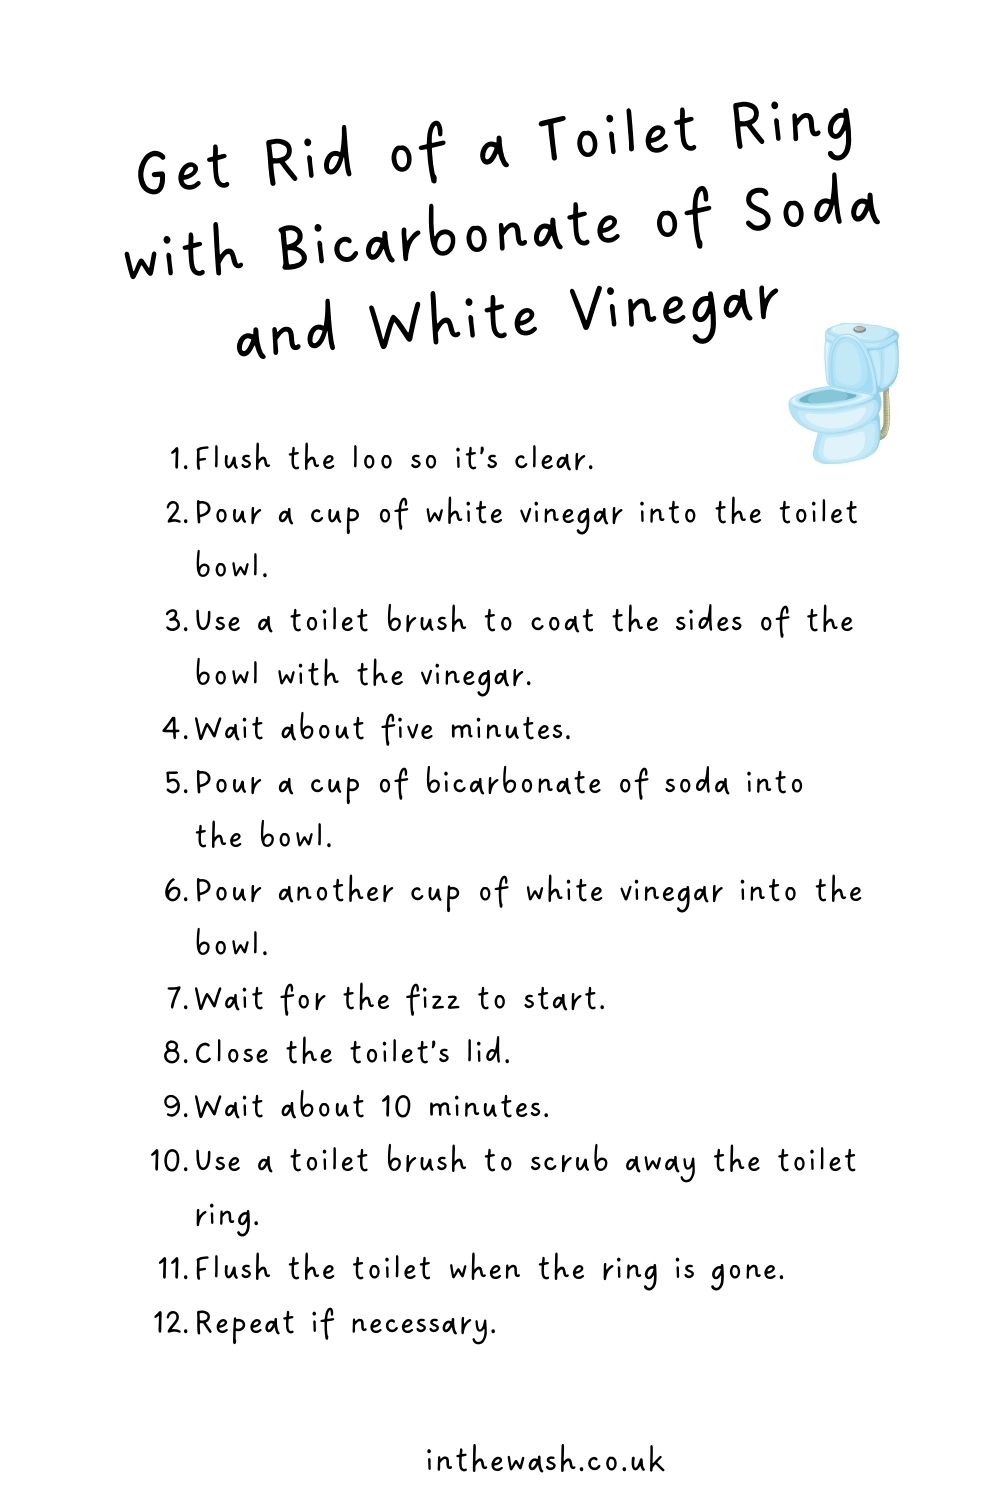 How to get rid of a toilet ring with bicarbonate of soda and white vinegar